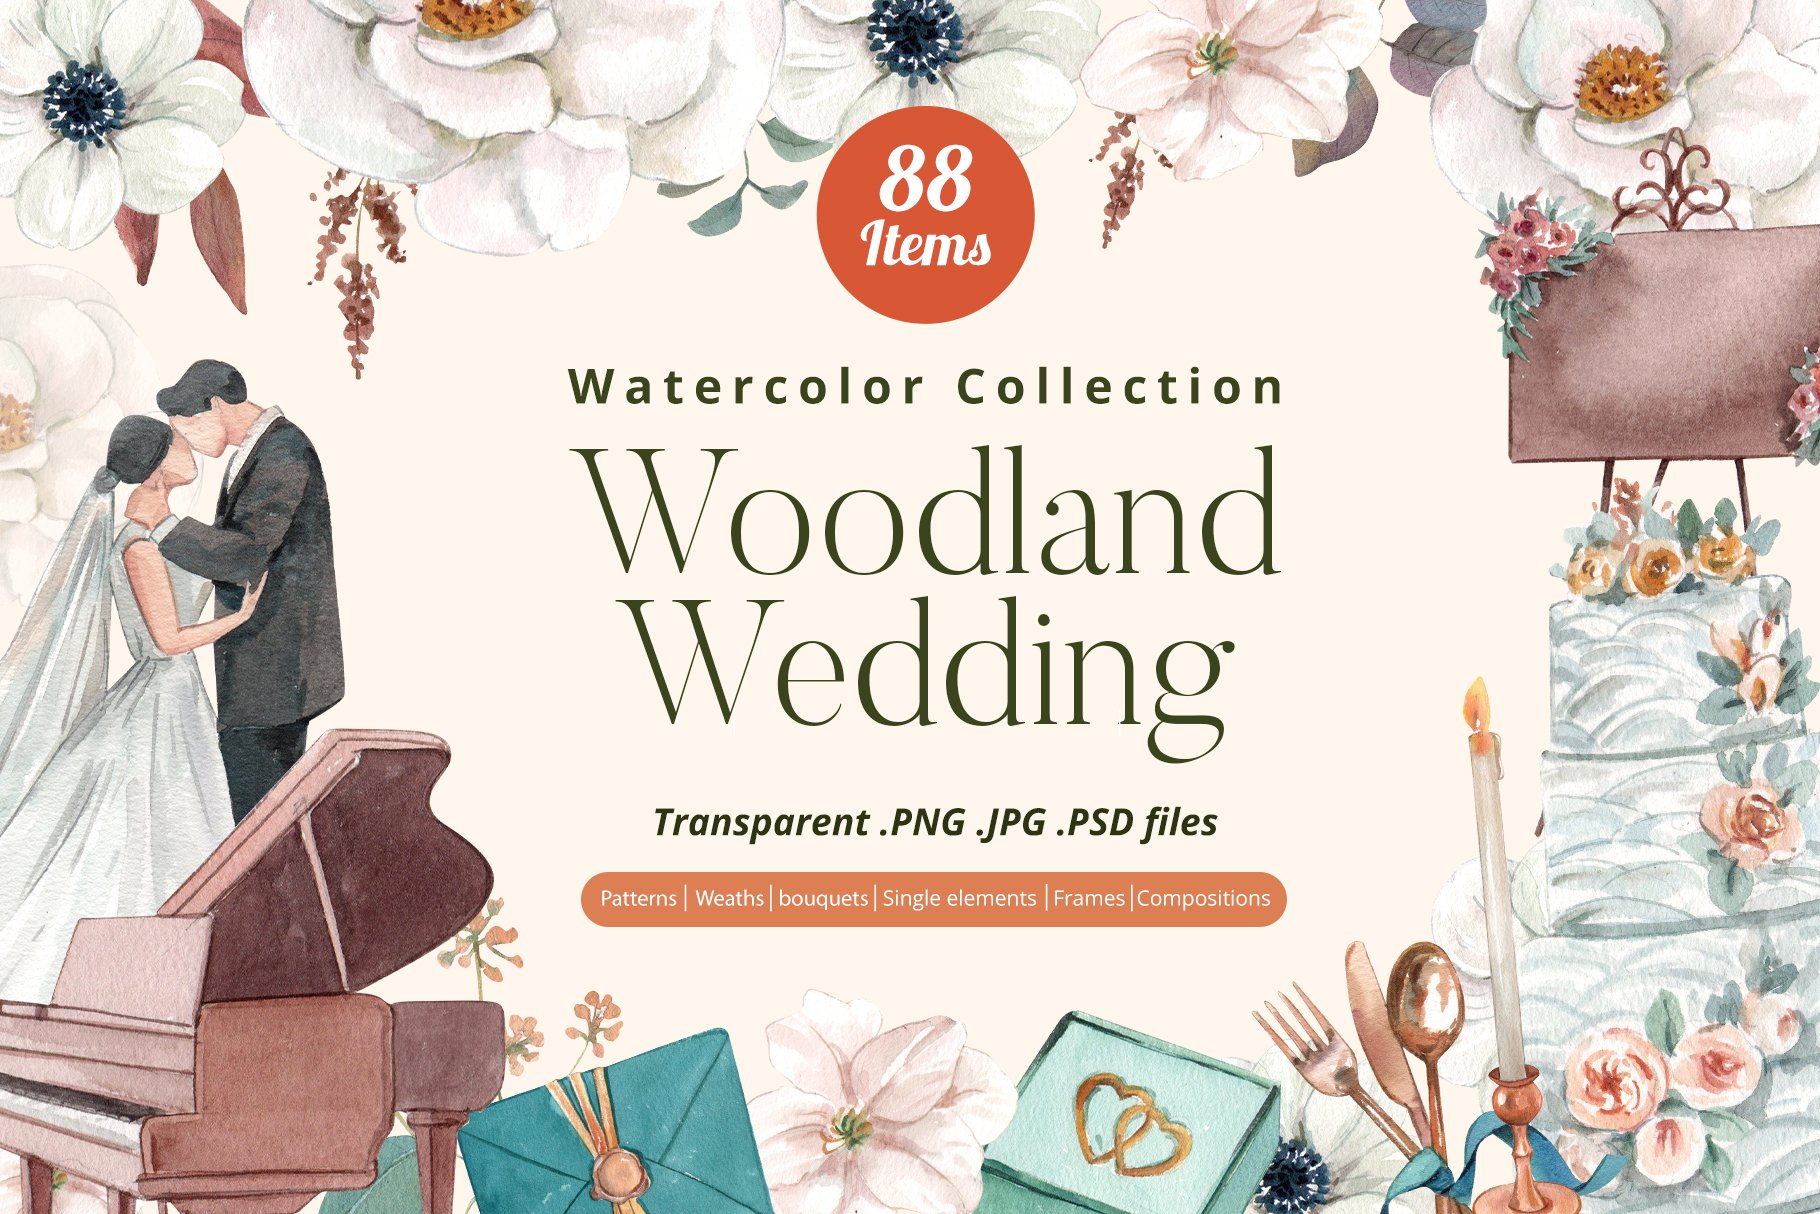 Woodland Wedding Watercolor cover image.